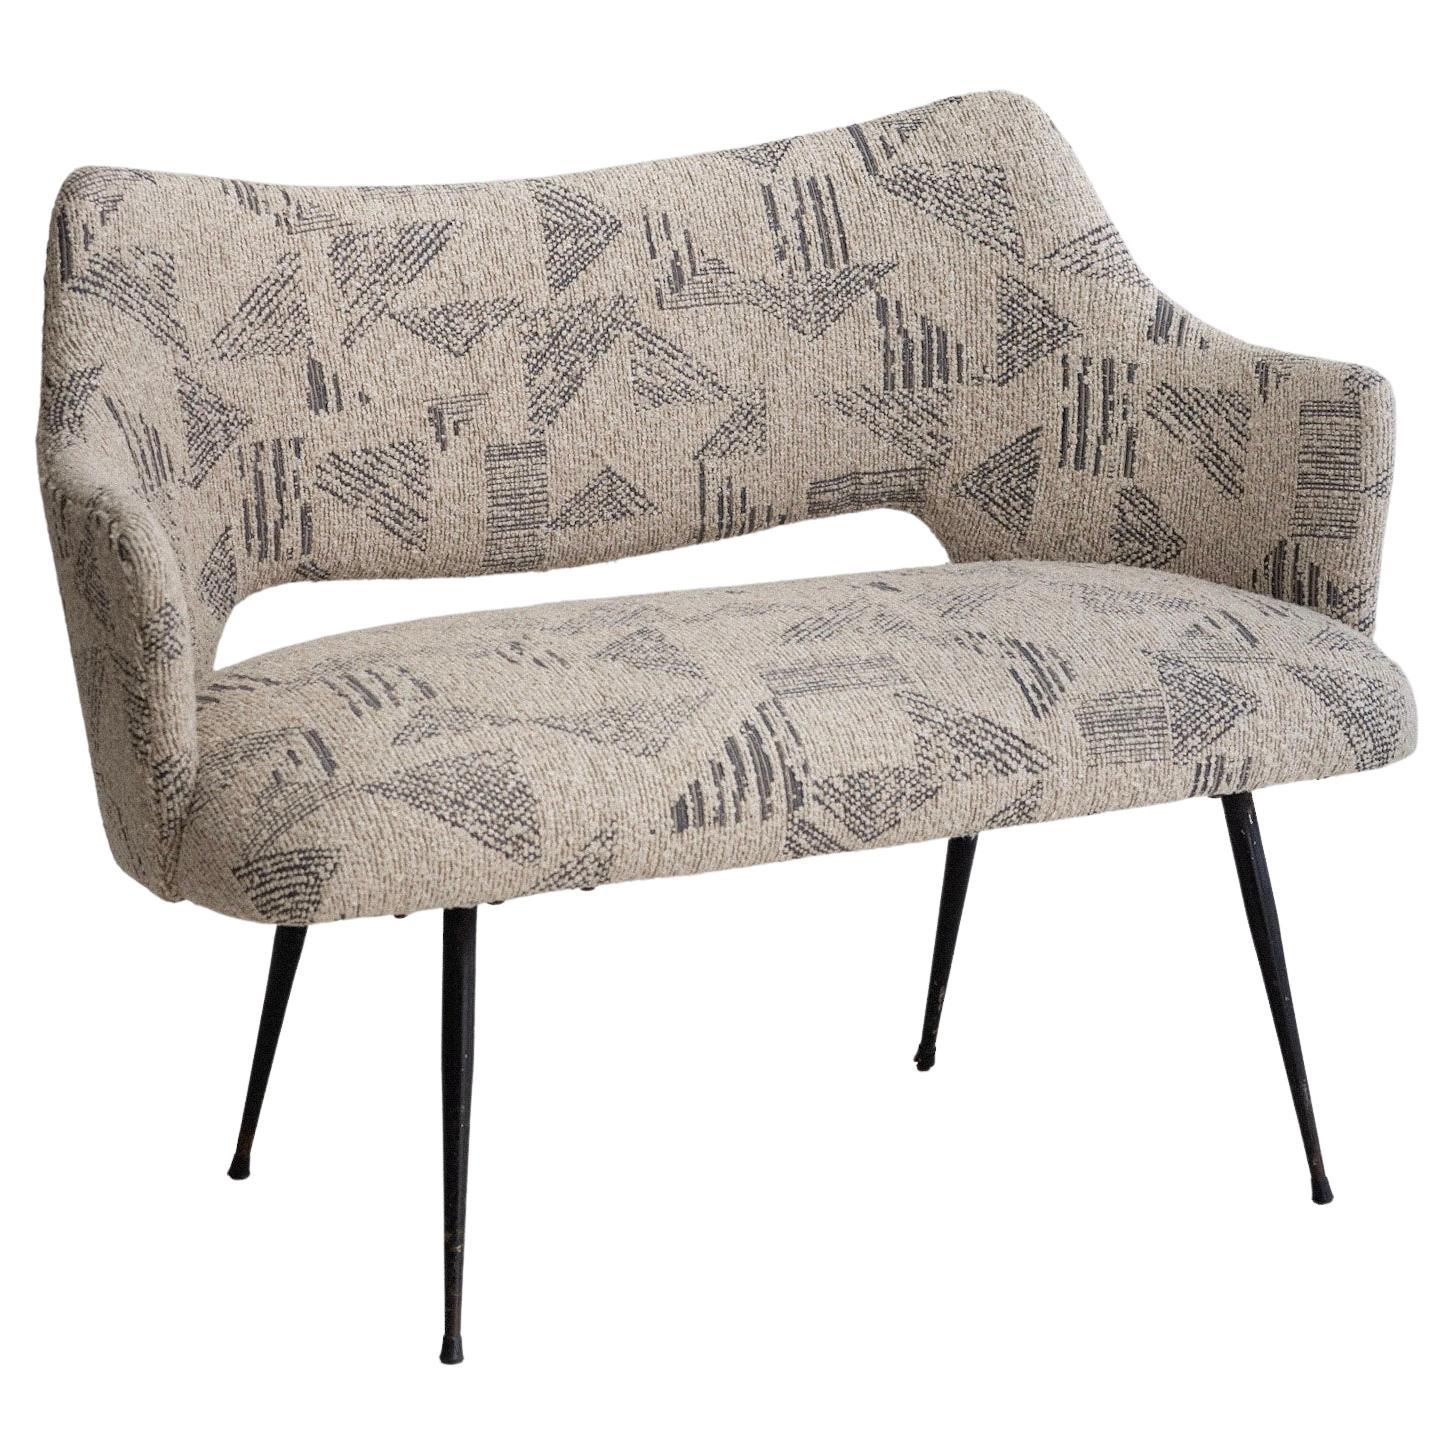 Midcentury Italian Settee in a 'Holly Hunt' Patterned Bouclé